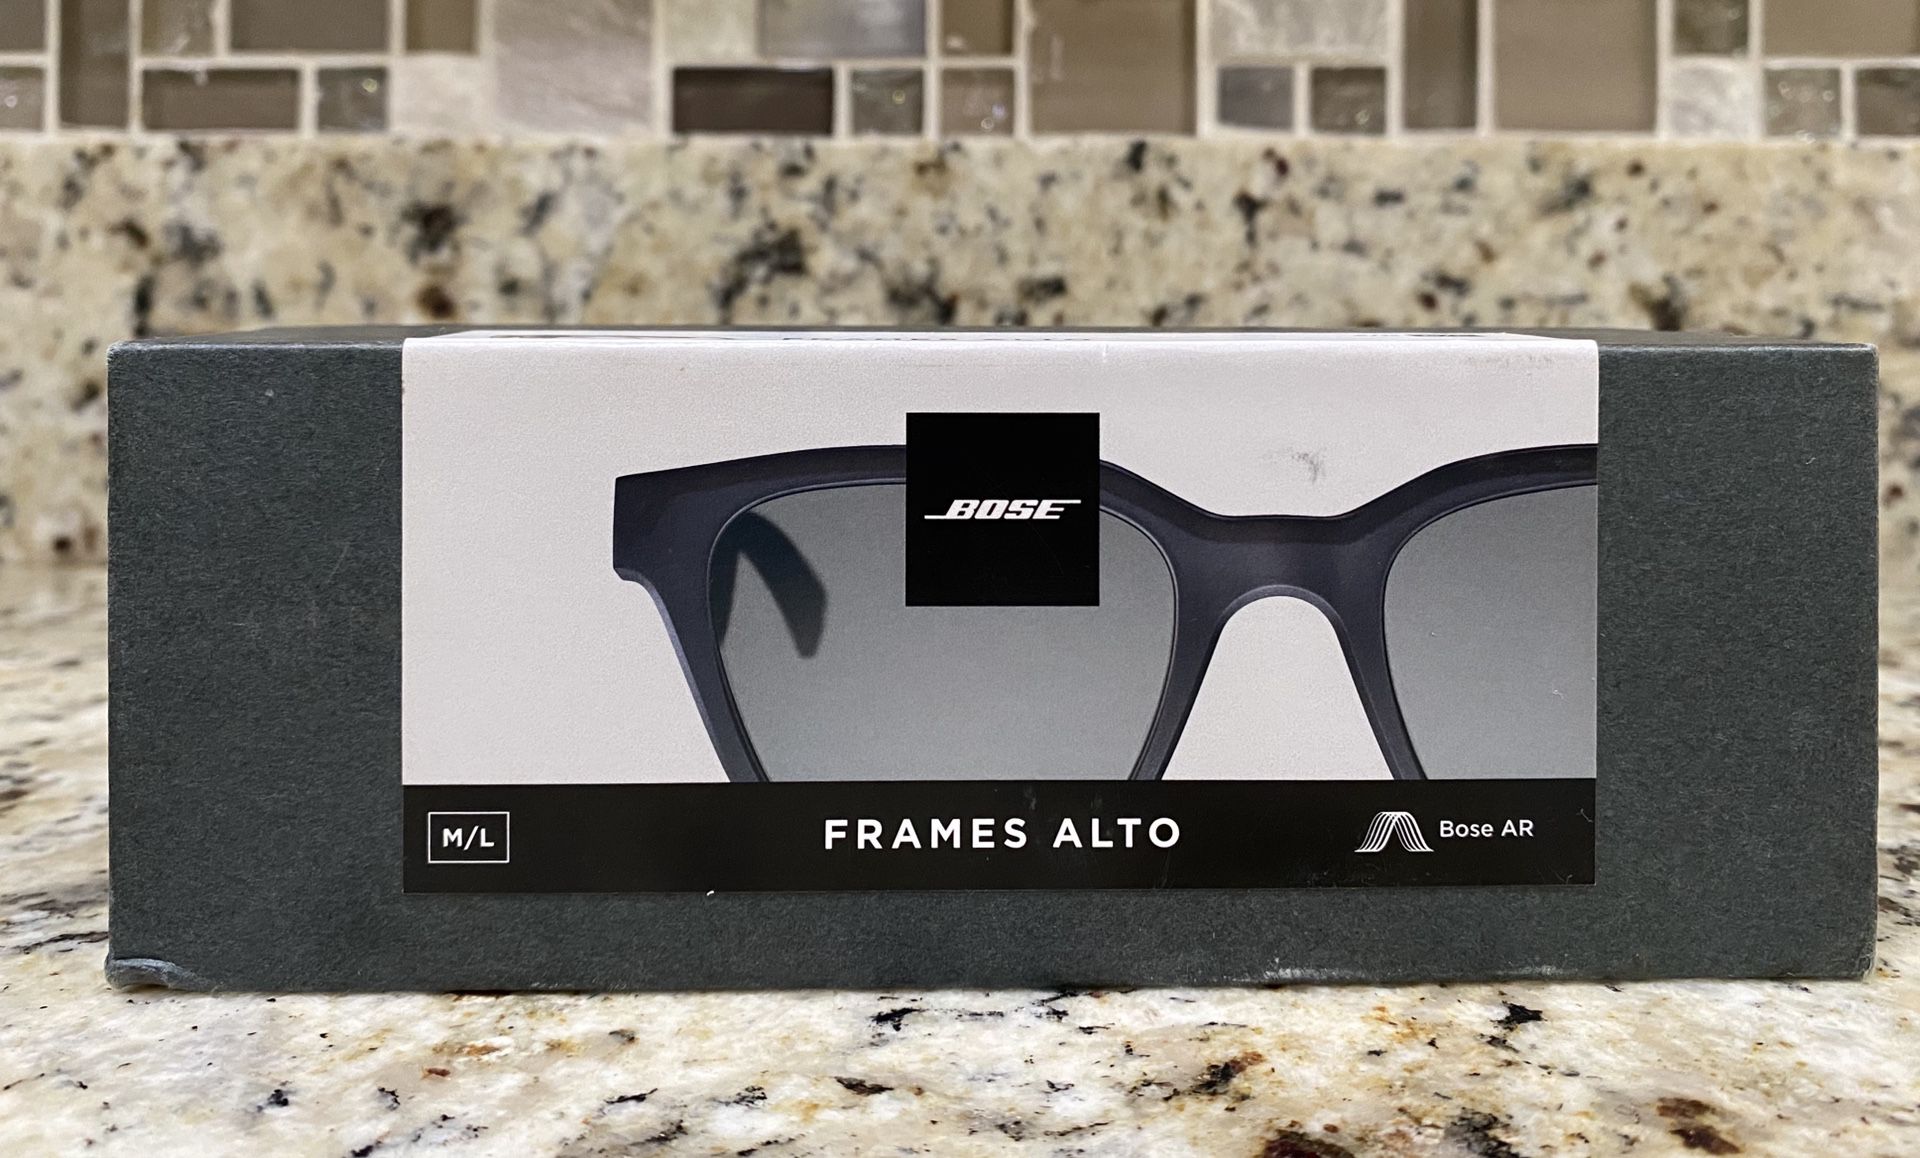 Bose Frames Alto Sunglasses with Built-in Speakers